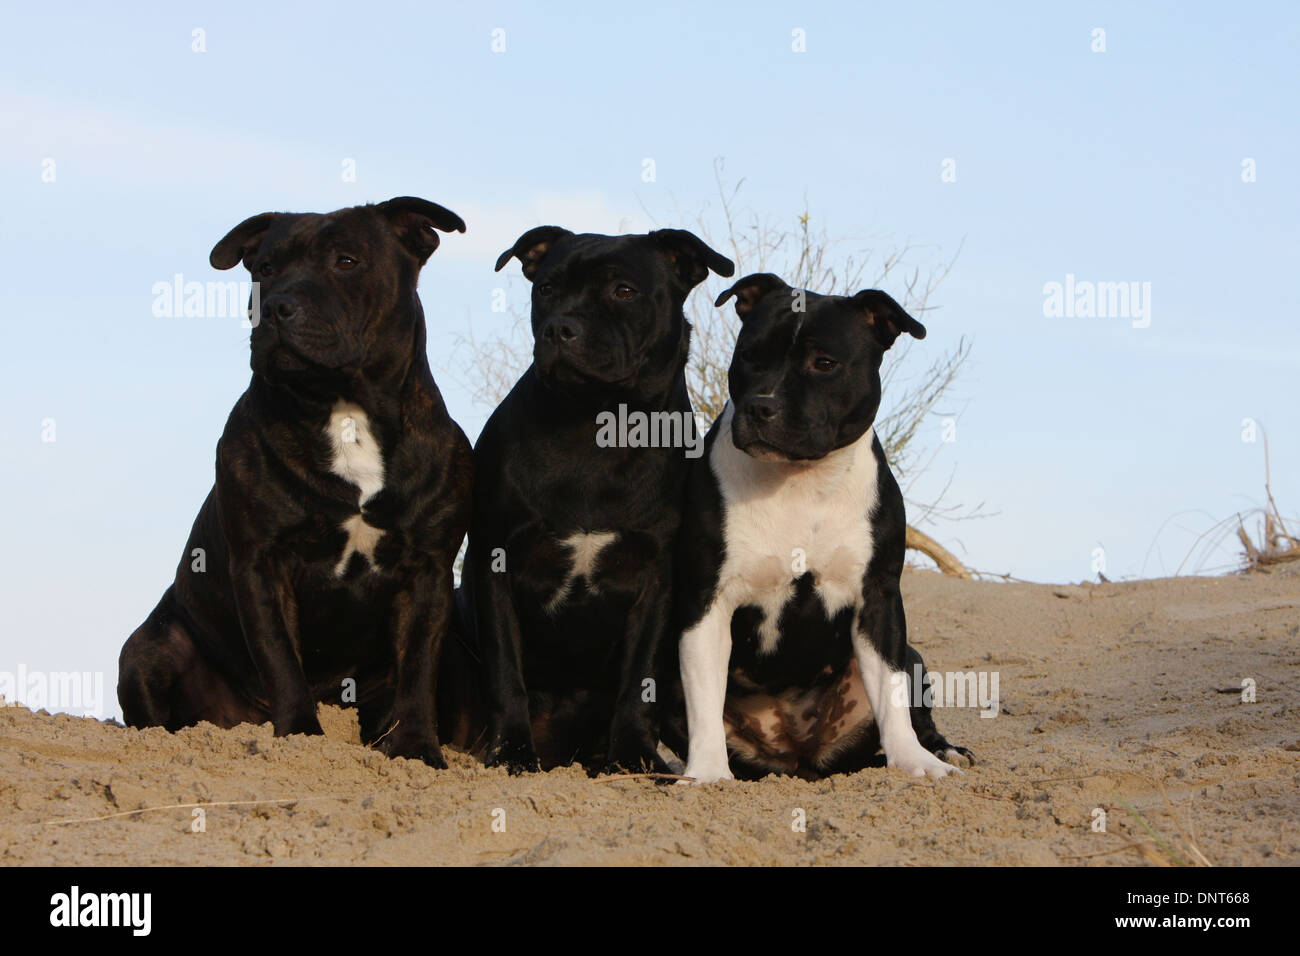 dog Staffordshire Bull Terrier / Staffie  three adults sitting on the sand Stock Photo